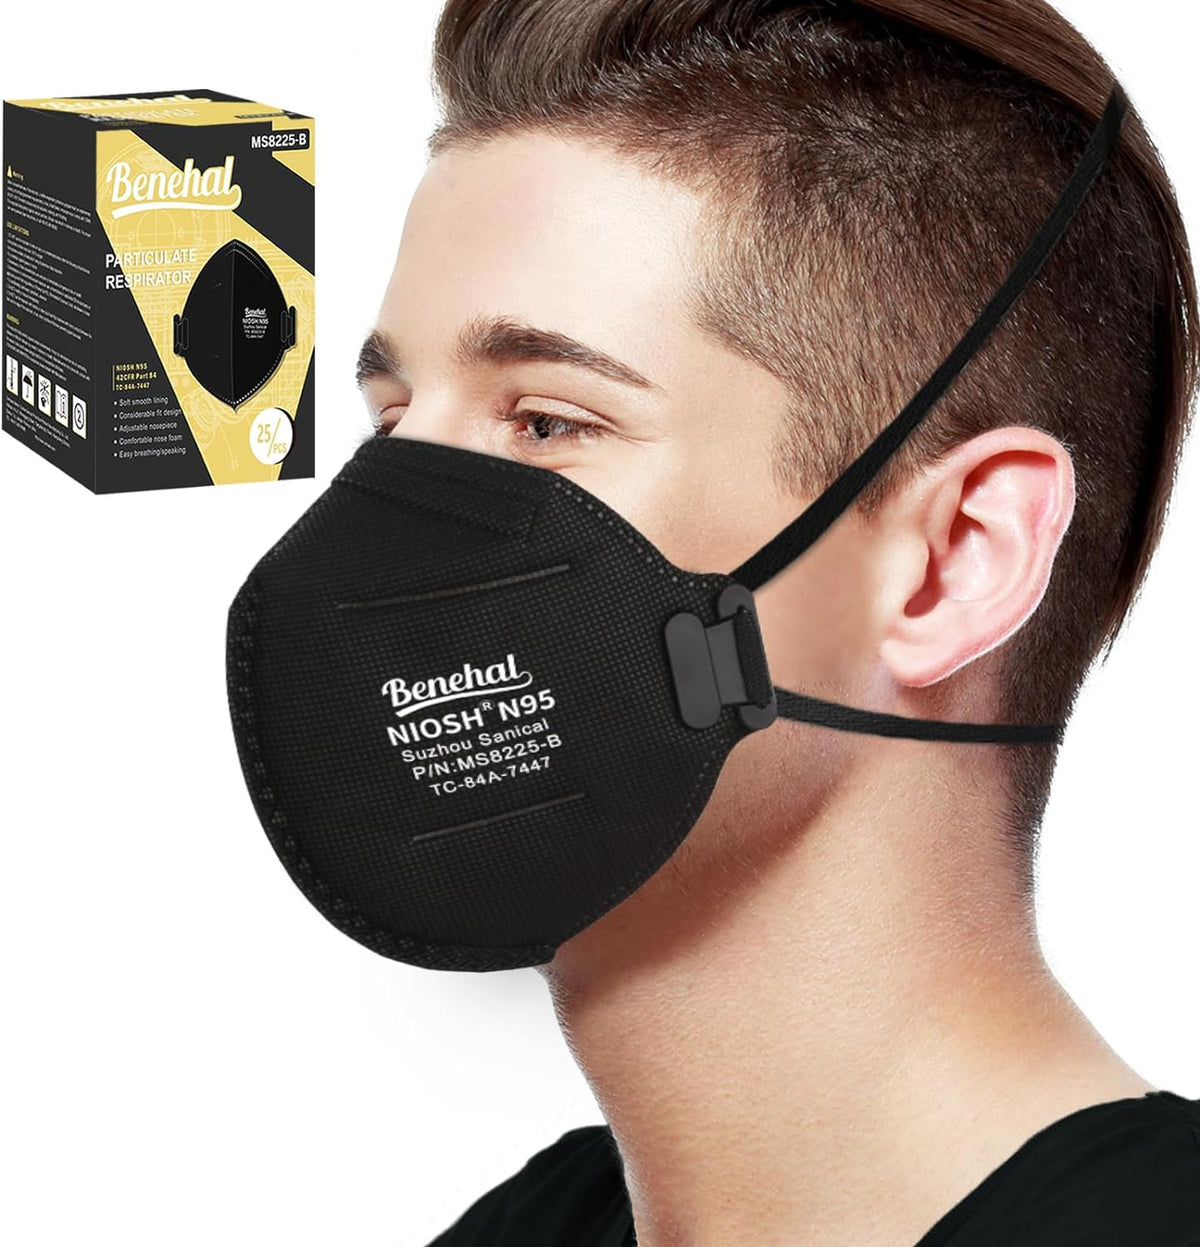 Benehal NIOSH Approved N95 Face Masks Particulate Respirators, Pack of 25 N95 Masks, Individually Wrapped, Black